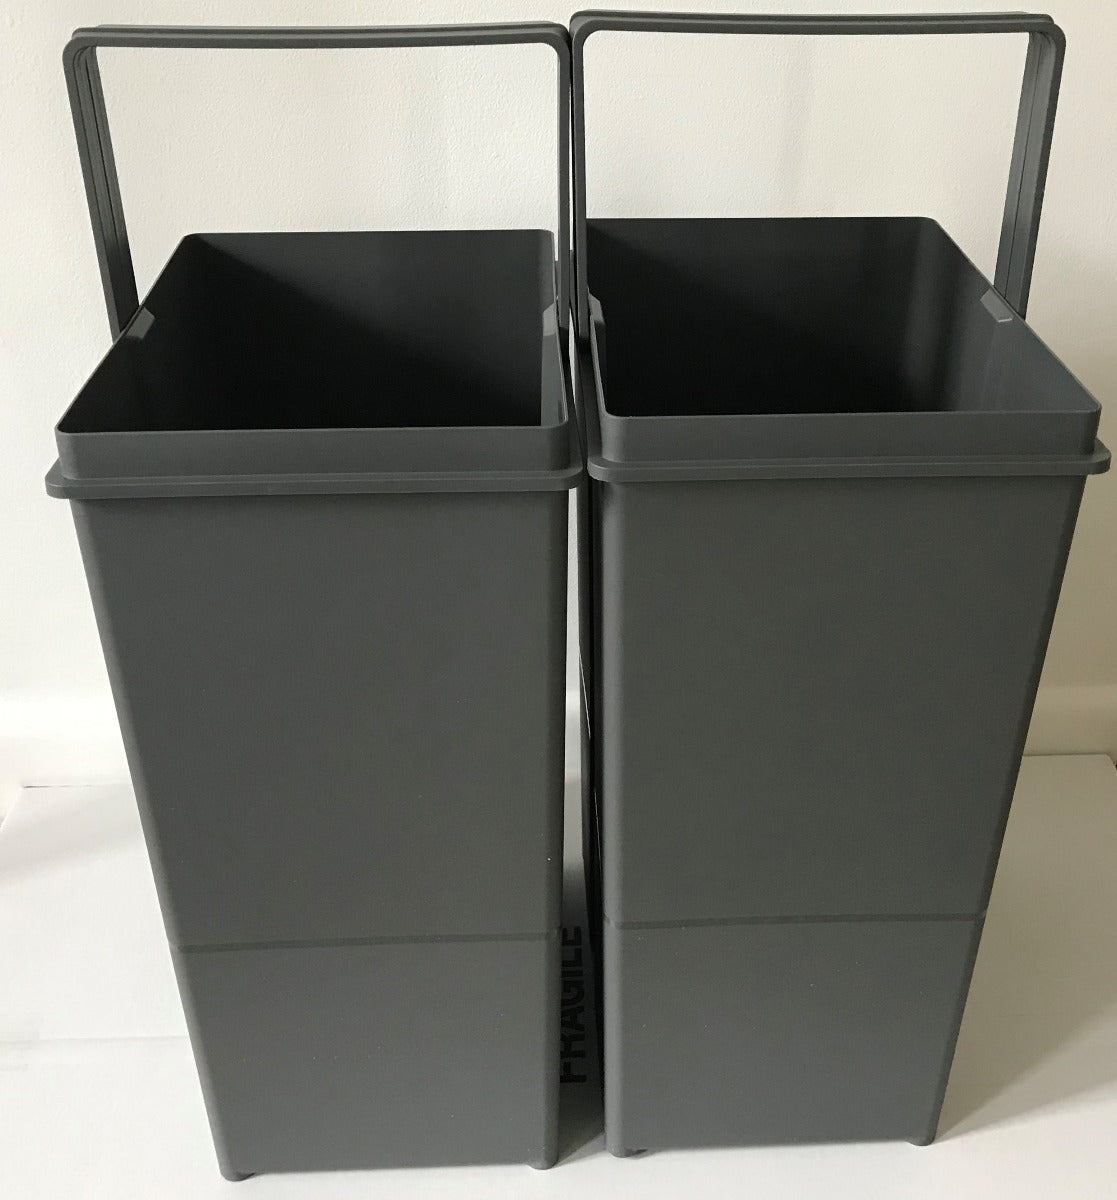 Gollinucci Linea 580 Plus 2 Compartment 58L Recycler With OVERALL LID : 400mm Door